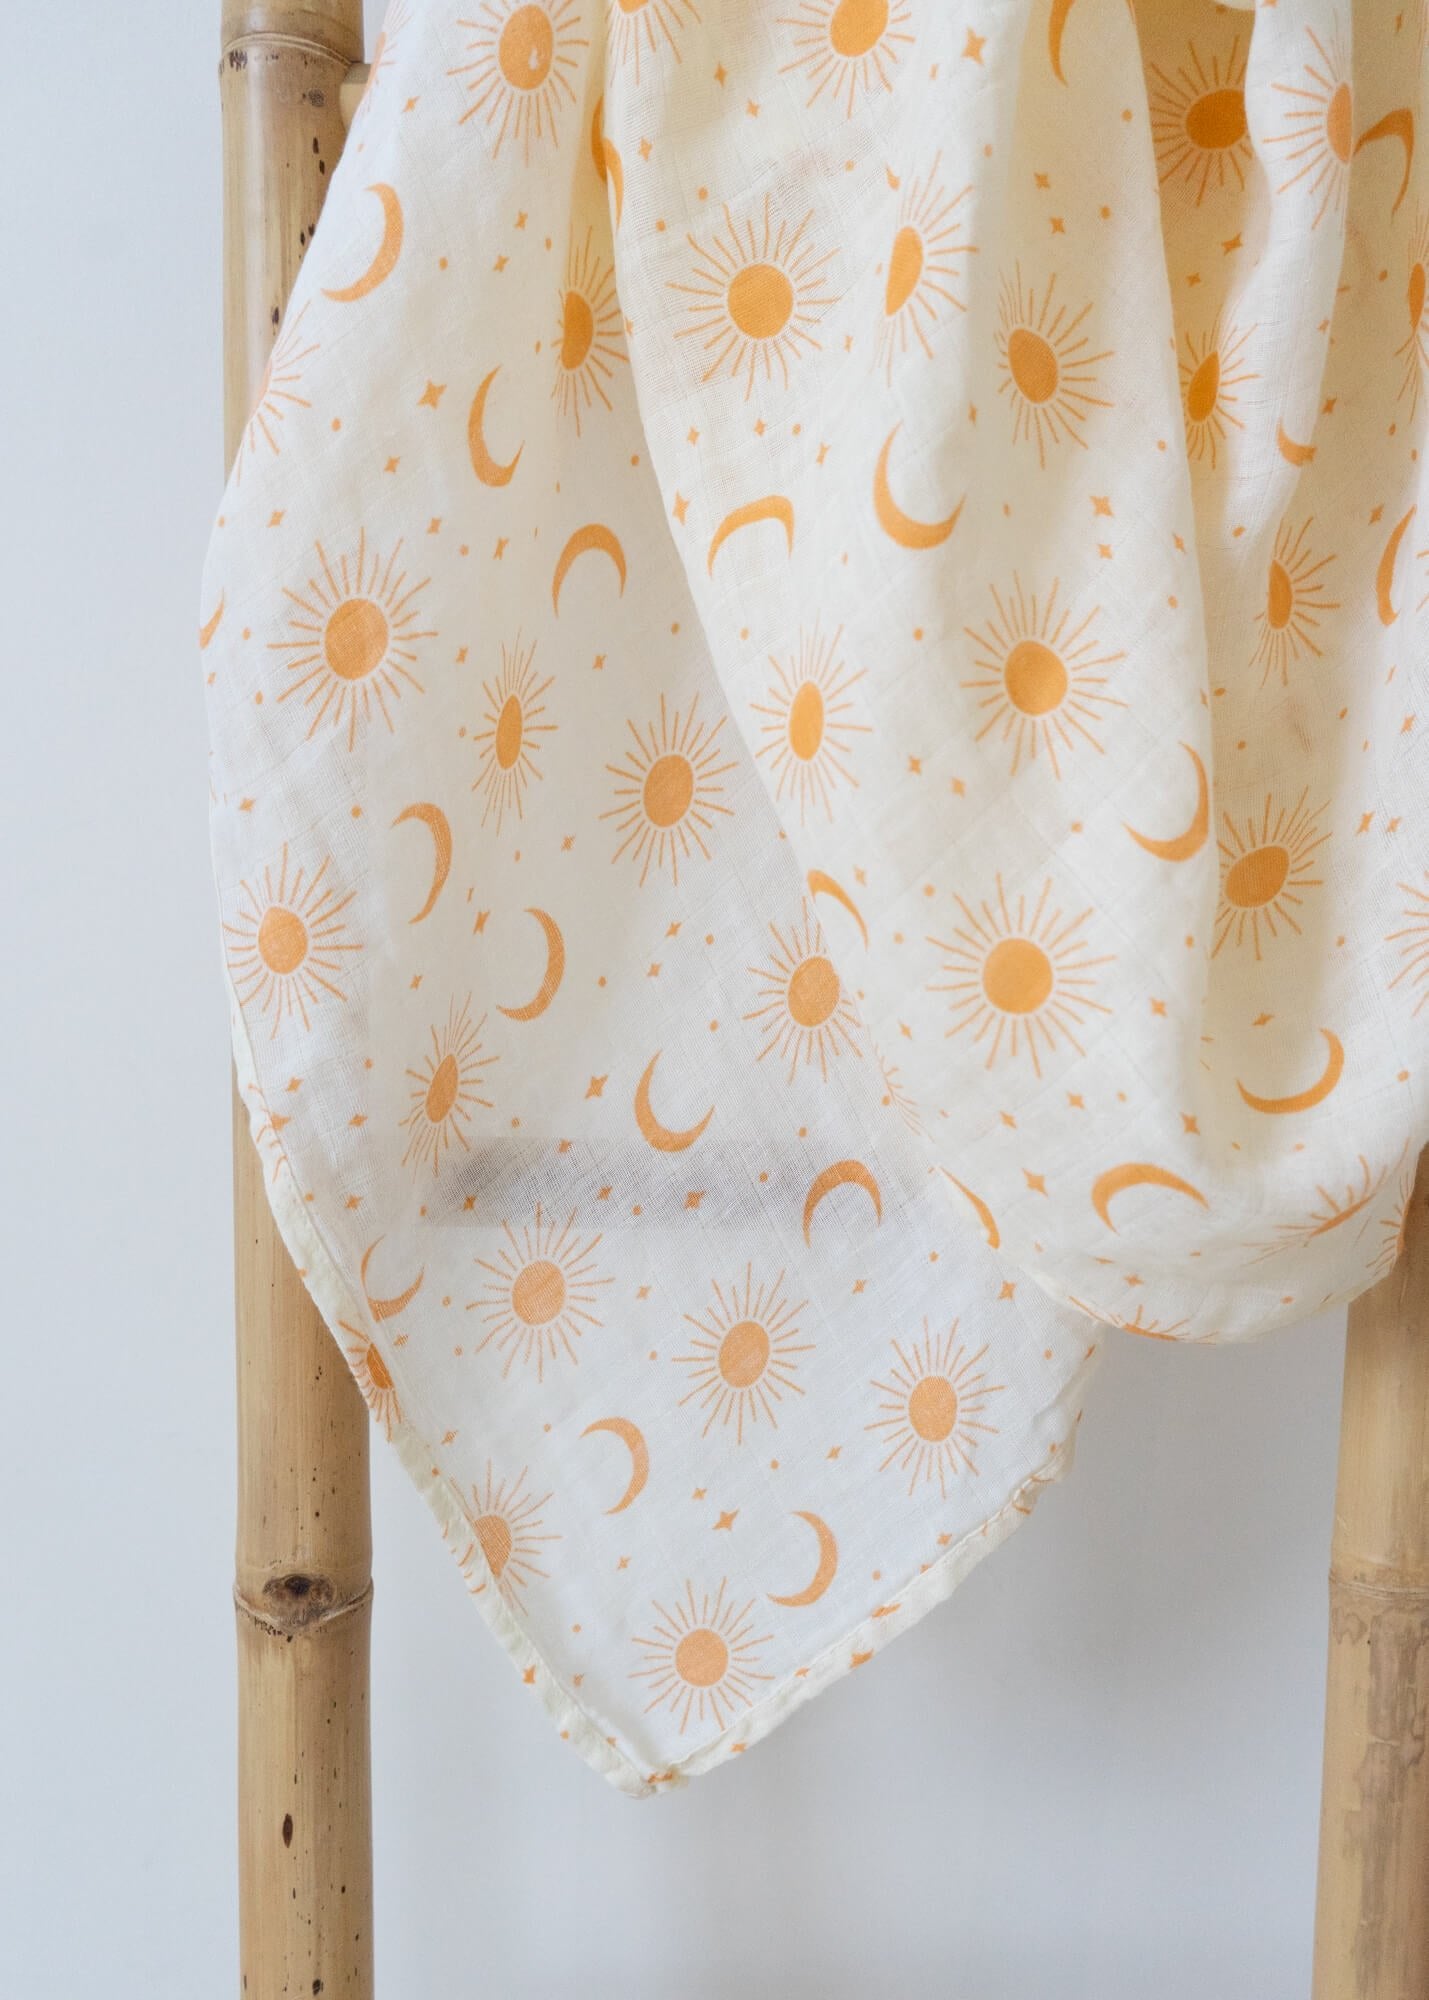 SYRUS Large Sun, Moon and Star Print Cotton Muslin Swaddle - Rocco & The Fox